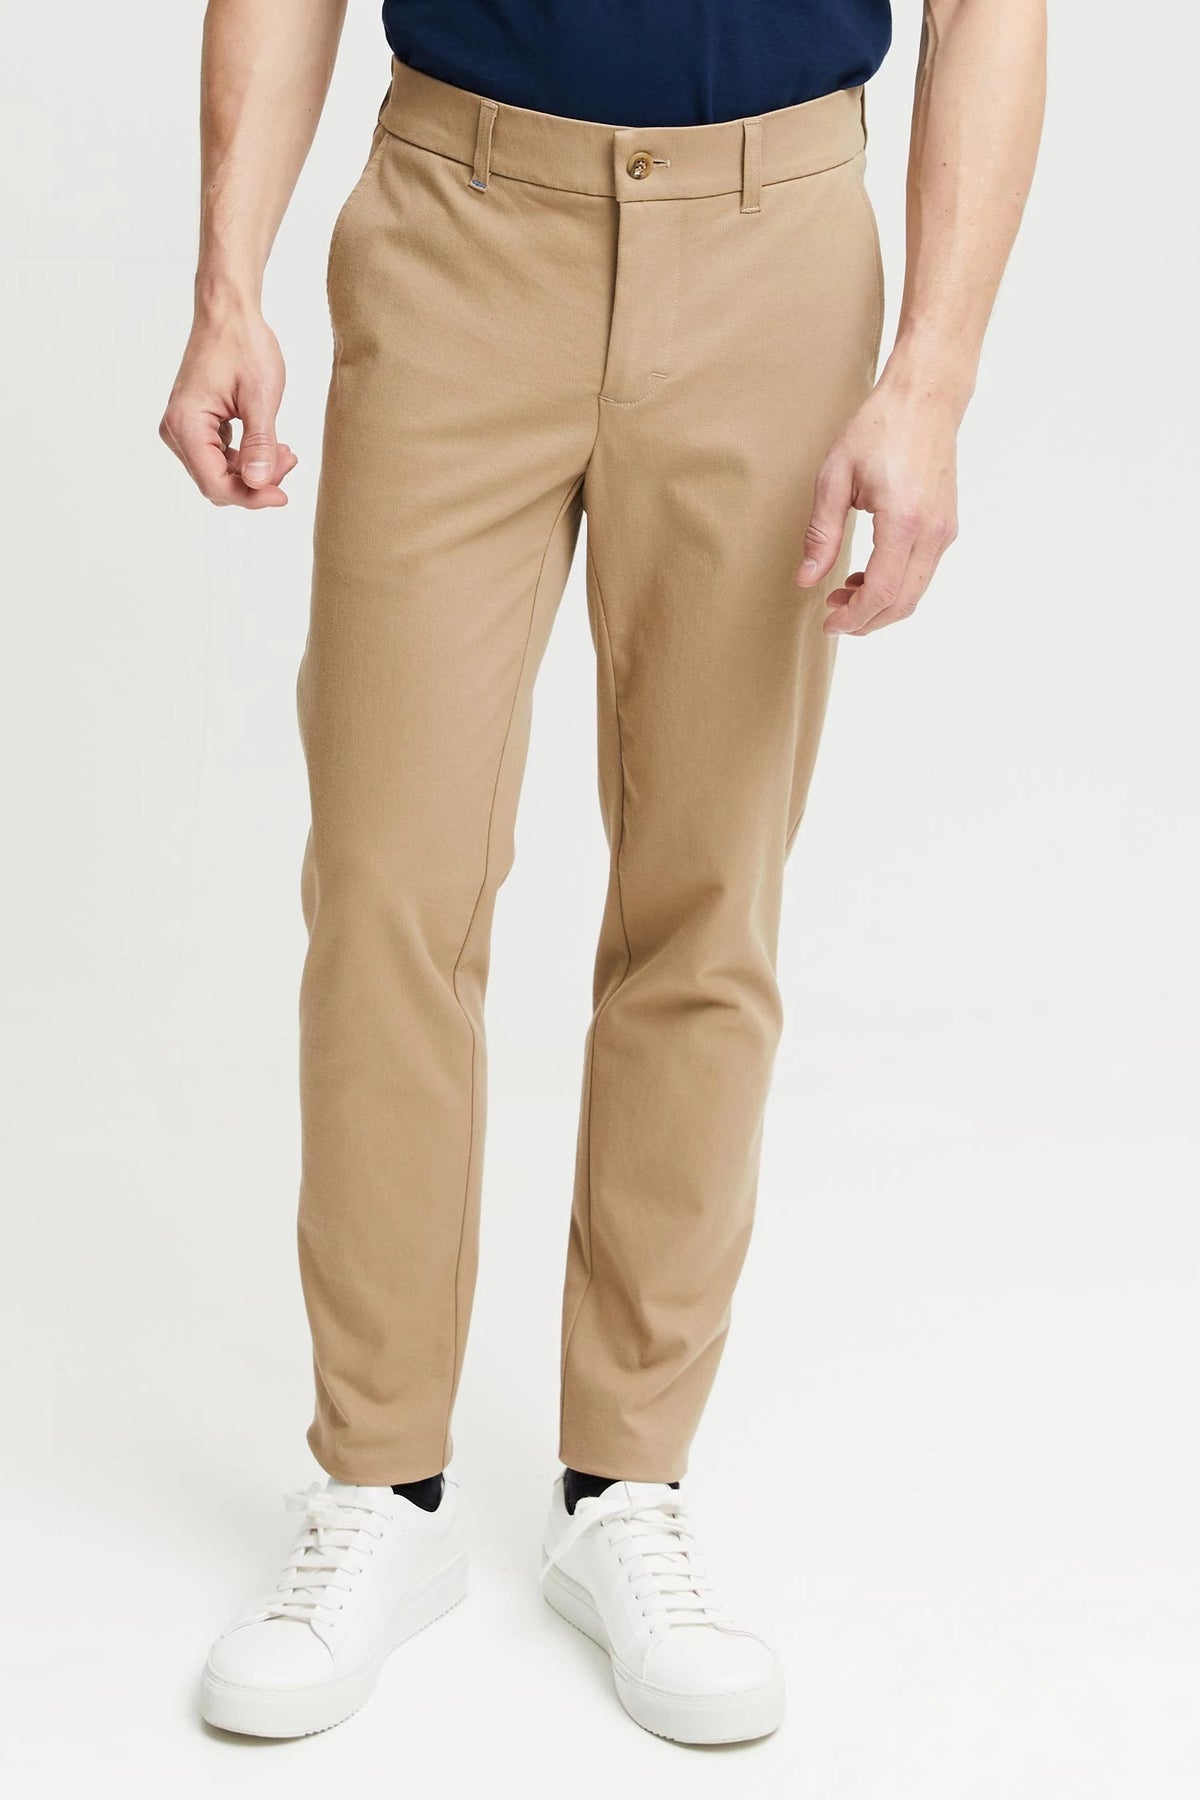 Enzyme Washed Lightweight Cotton Twill Pant – Zobello